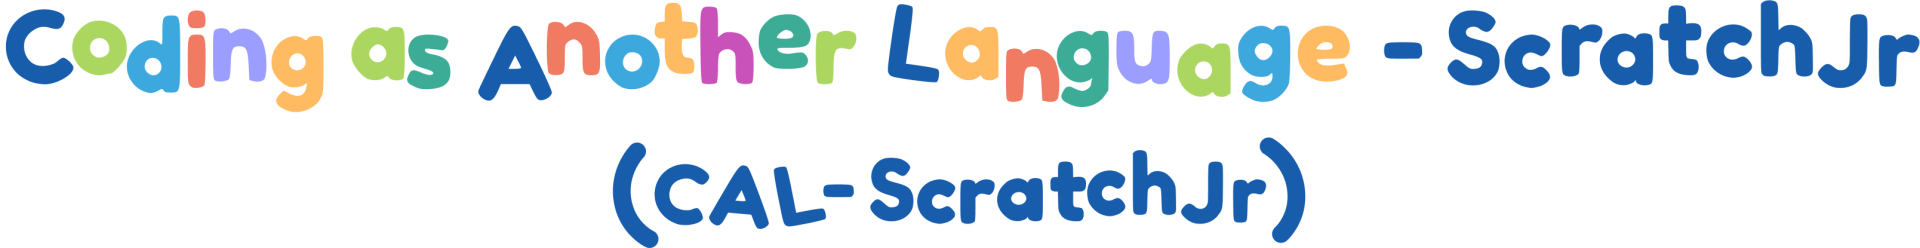 Coding as Another Language Scratch Junior logo.